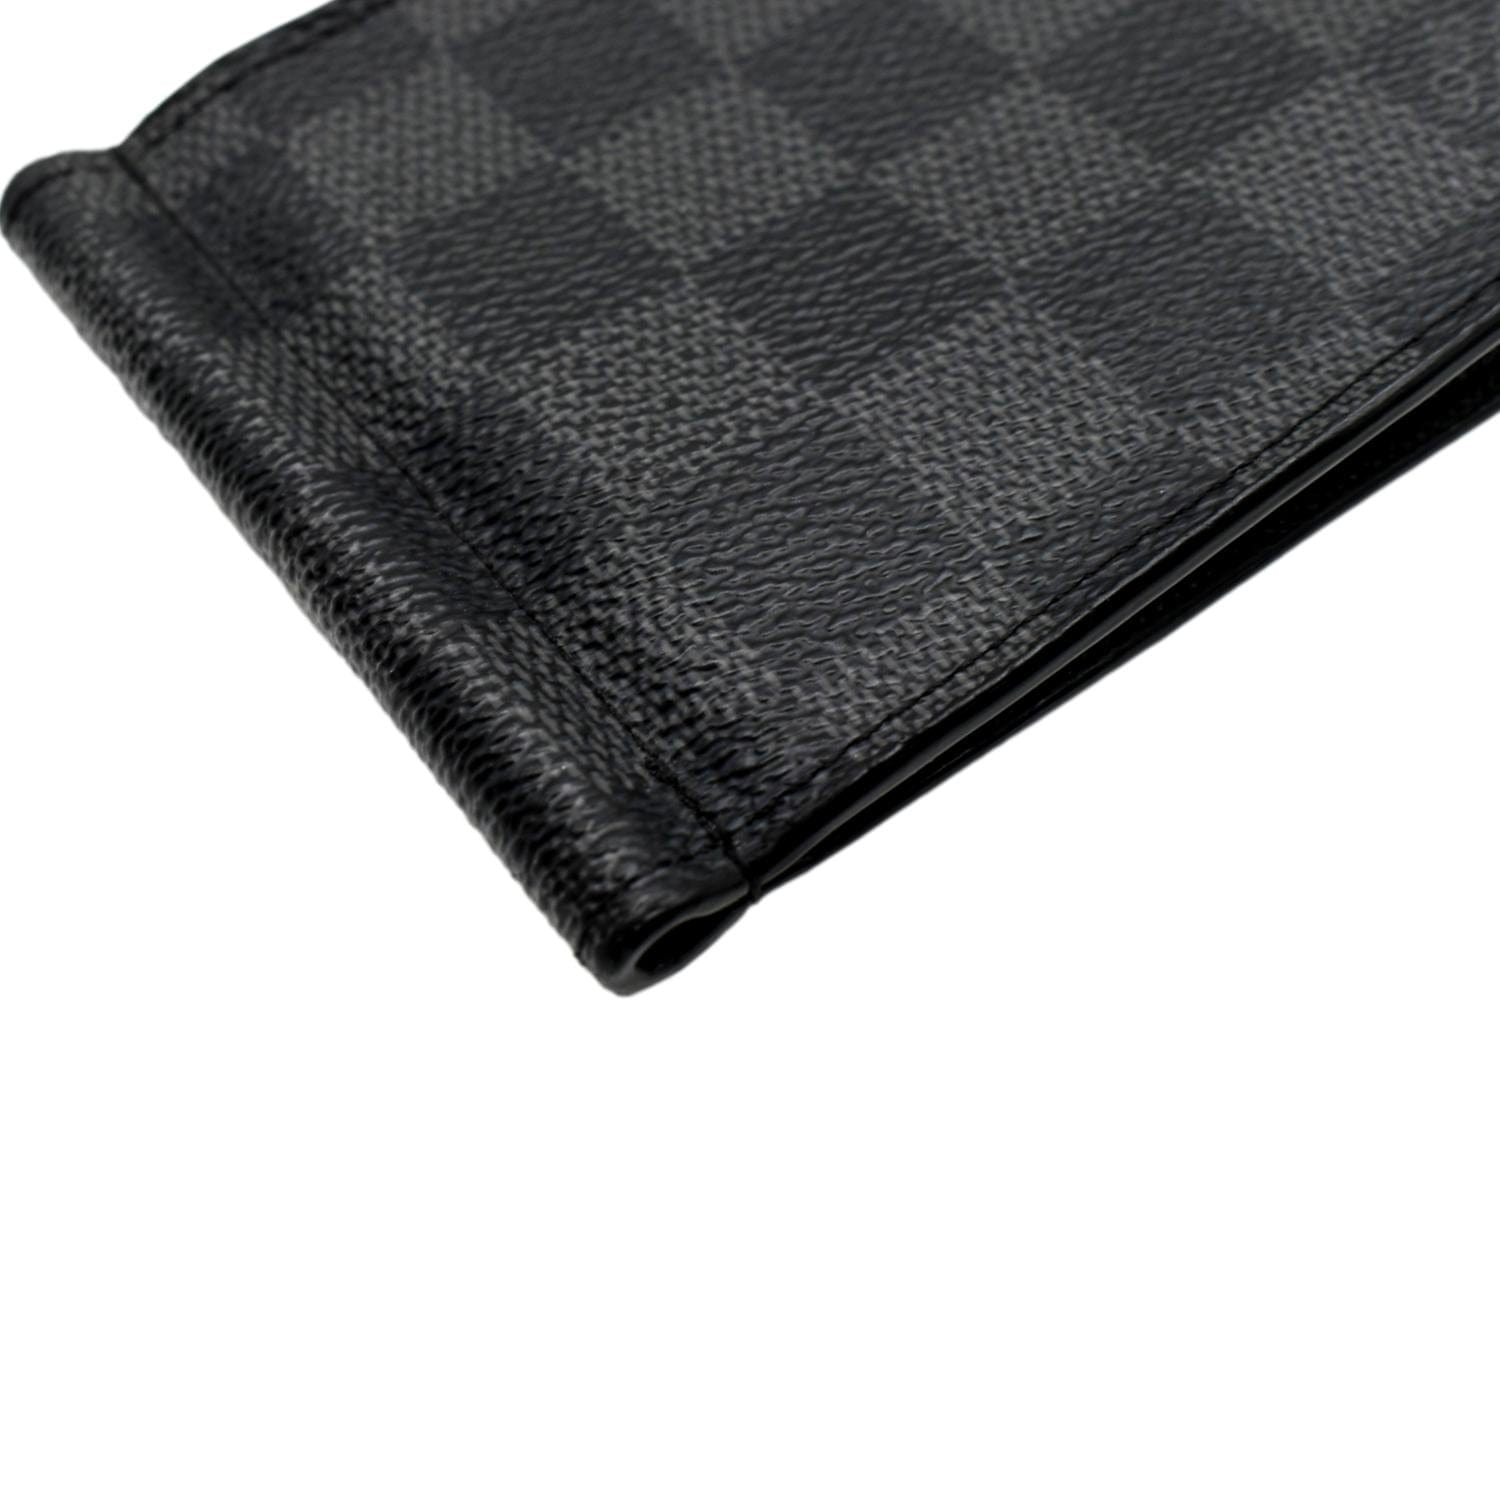 Louis Vuitton Pince Card Holder with Bill Clip